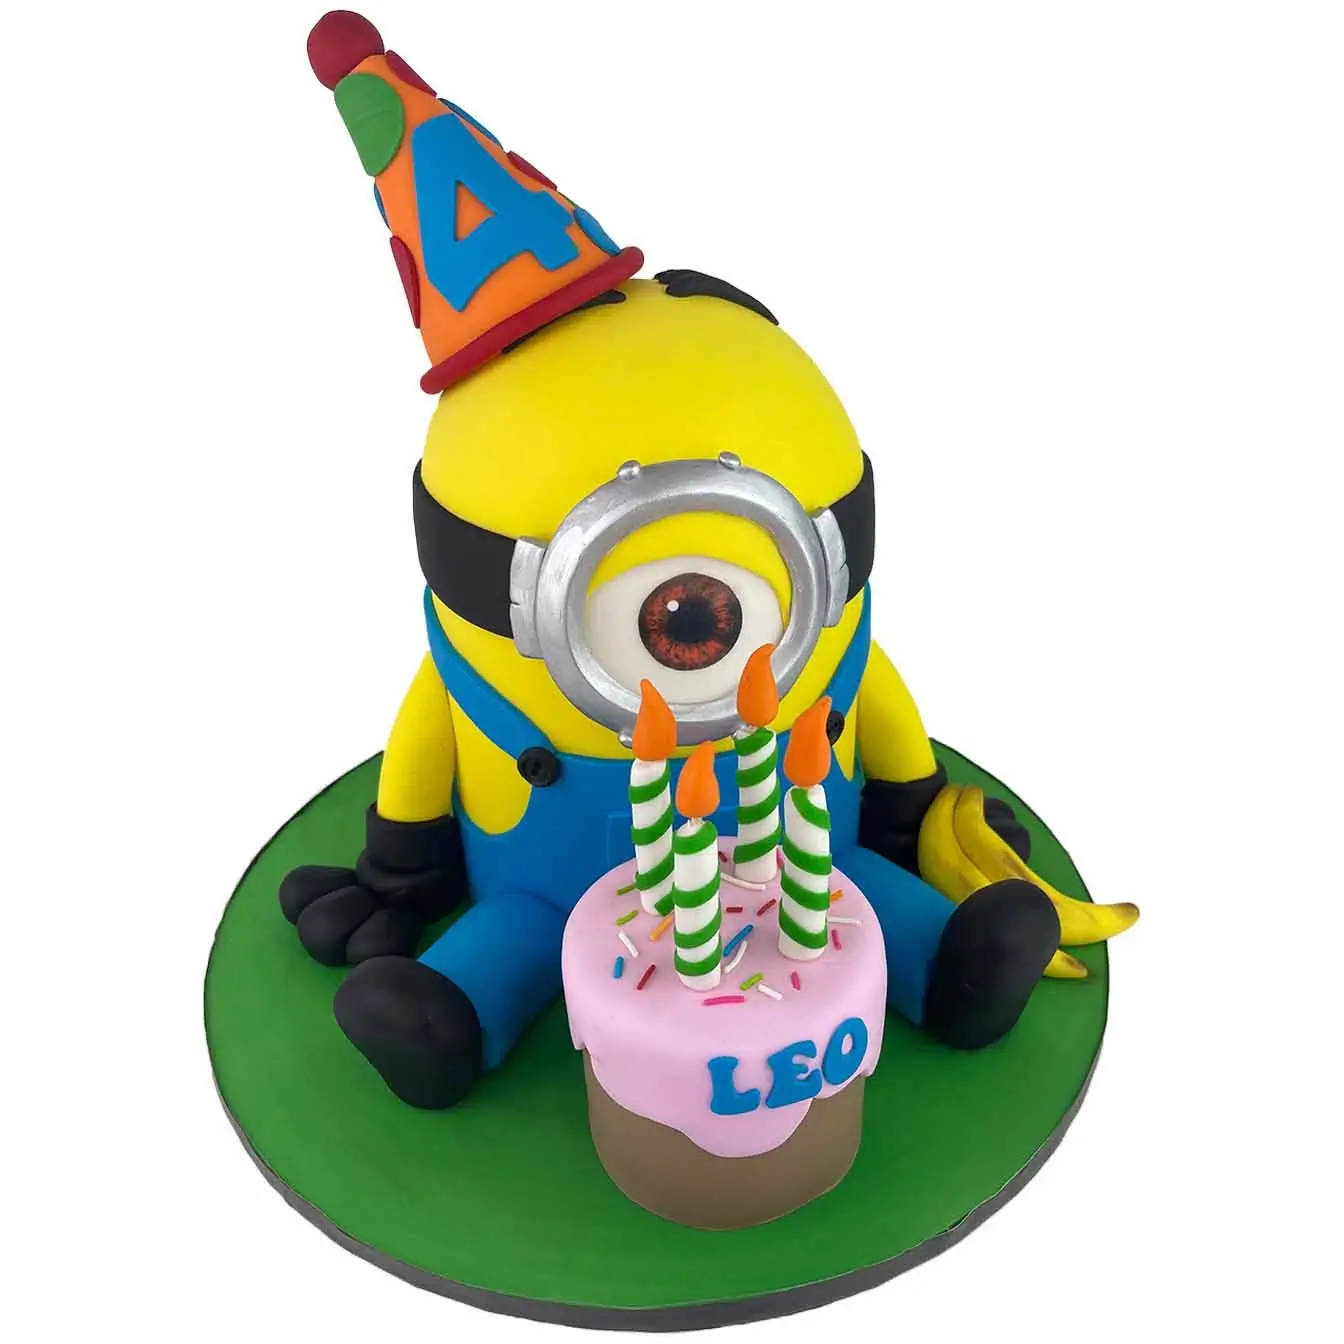 Minion Party Extravaganza Cake - A 3D Minion wearing a party hat, a fun and flavorful centerpiece for birthdays and Minion-themed celebrations.